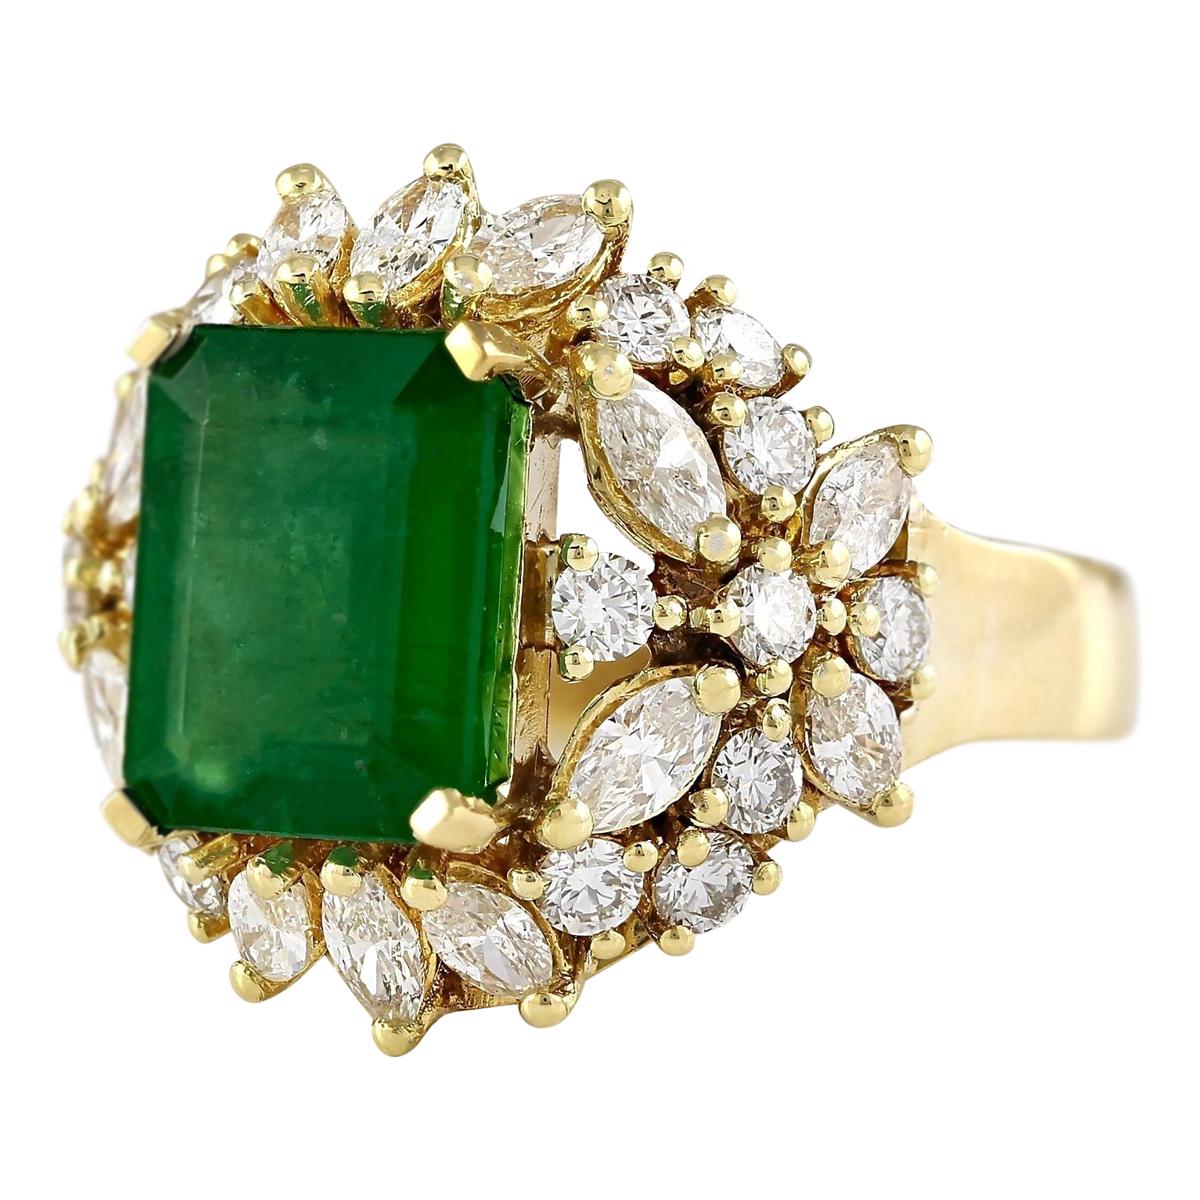 Step into the world of timeless elegance with this breathtaking Emerald and Diamond Ring, expertly crafted in luxurious 14K yellow gold. At the heart of the design sits a magnificent 6.61 carat emerald, boasting a captivating emerald cut and